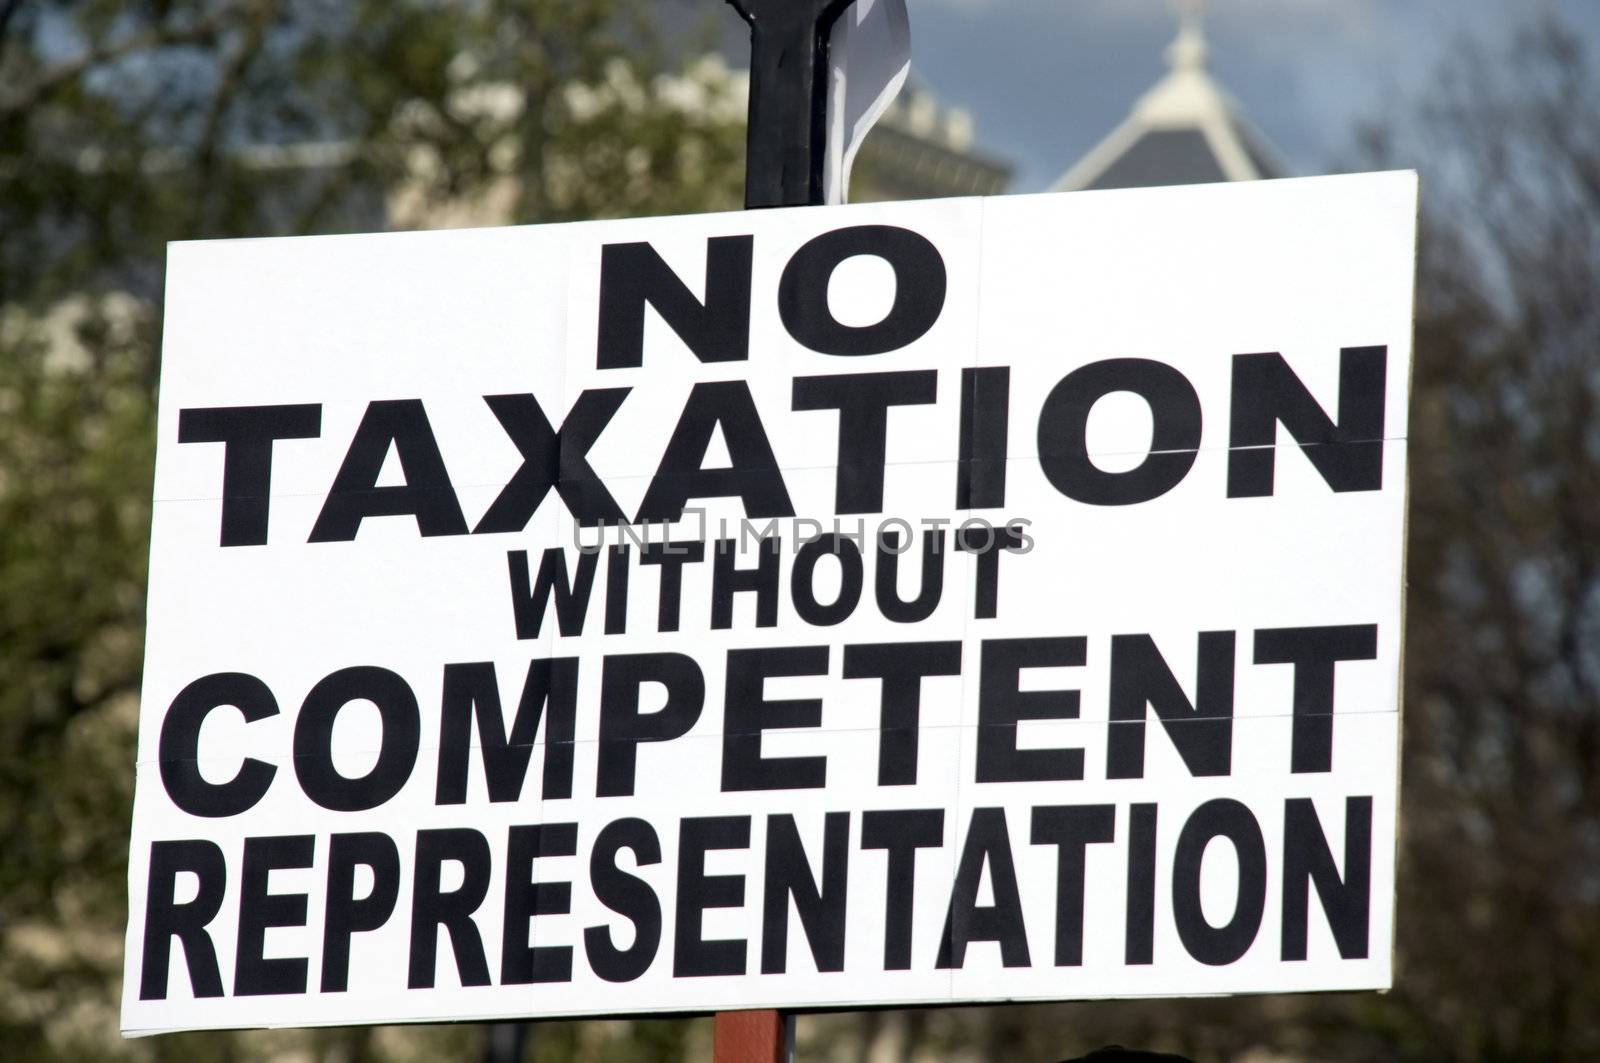 a sign in protest to taxes and the current economic conditions